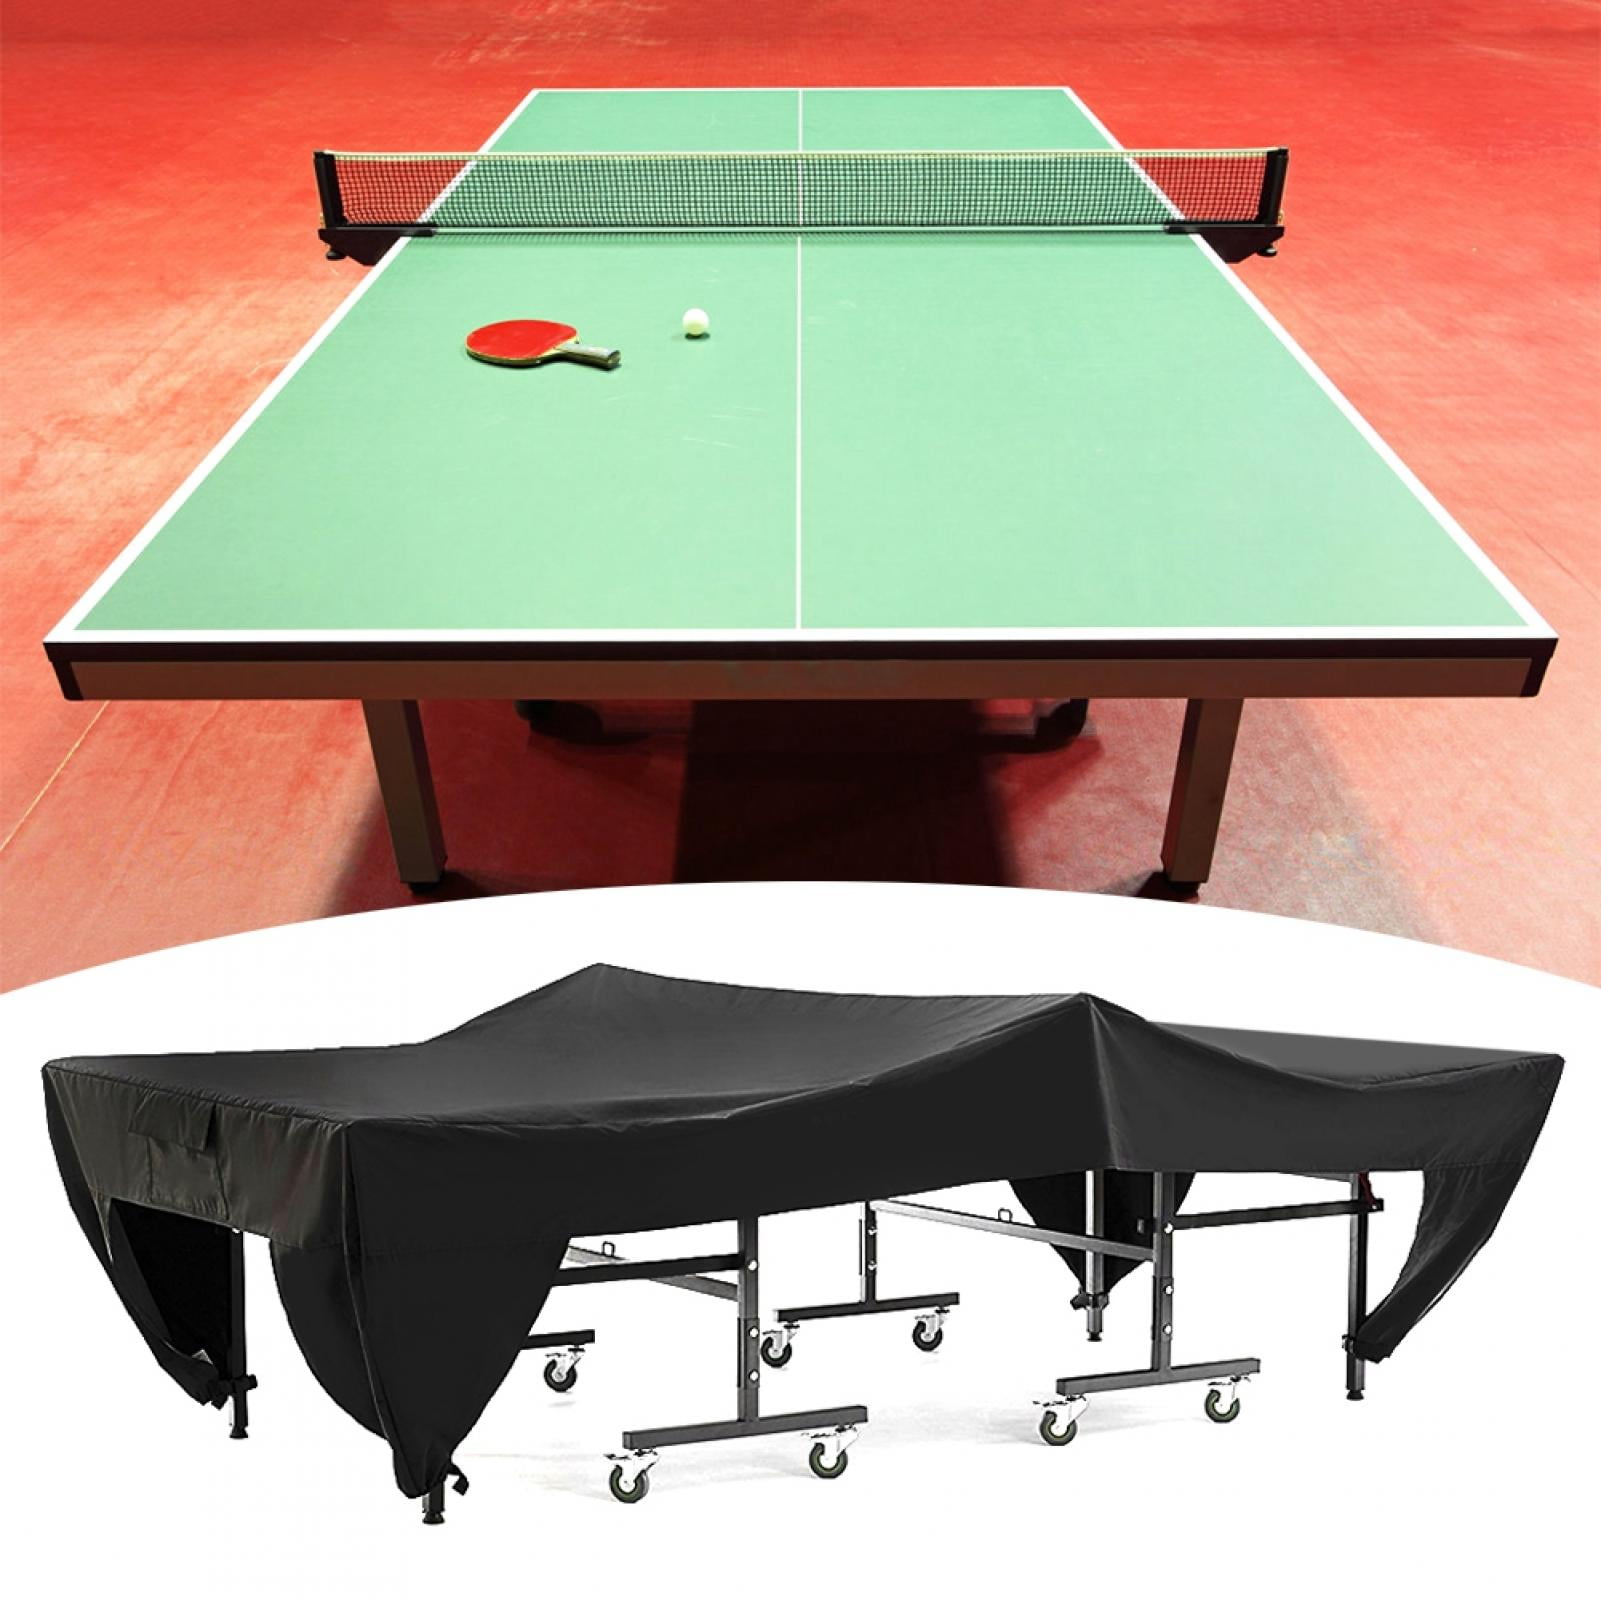 Waterproof Dust Protect Table Tennis Ping Pong Cover In/Outdoor Protector Oxford 